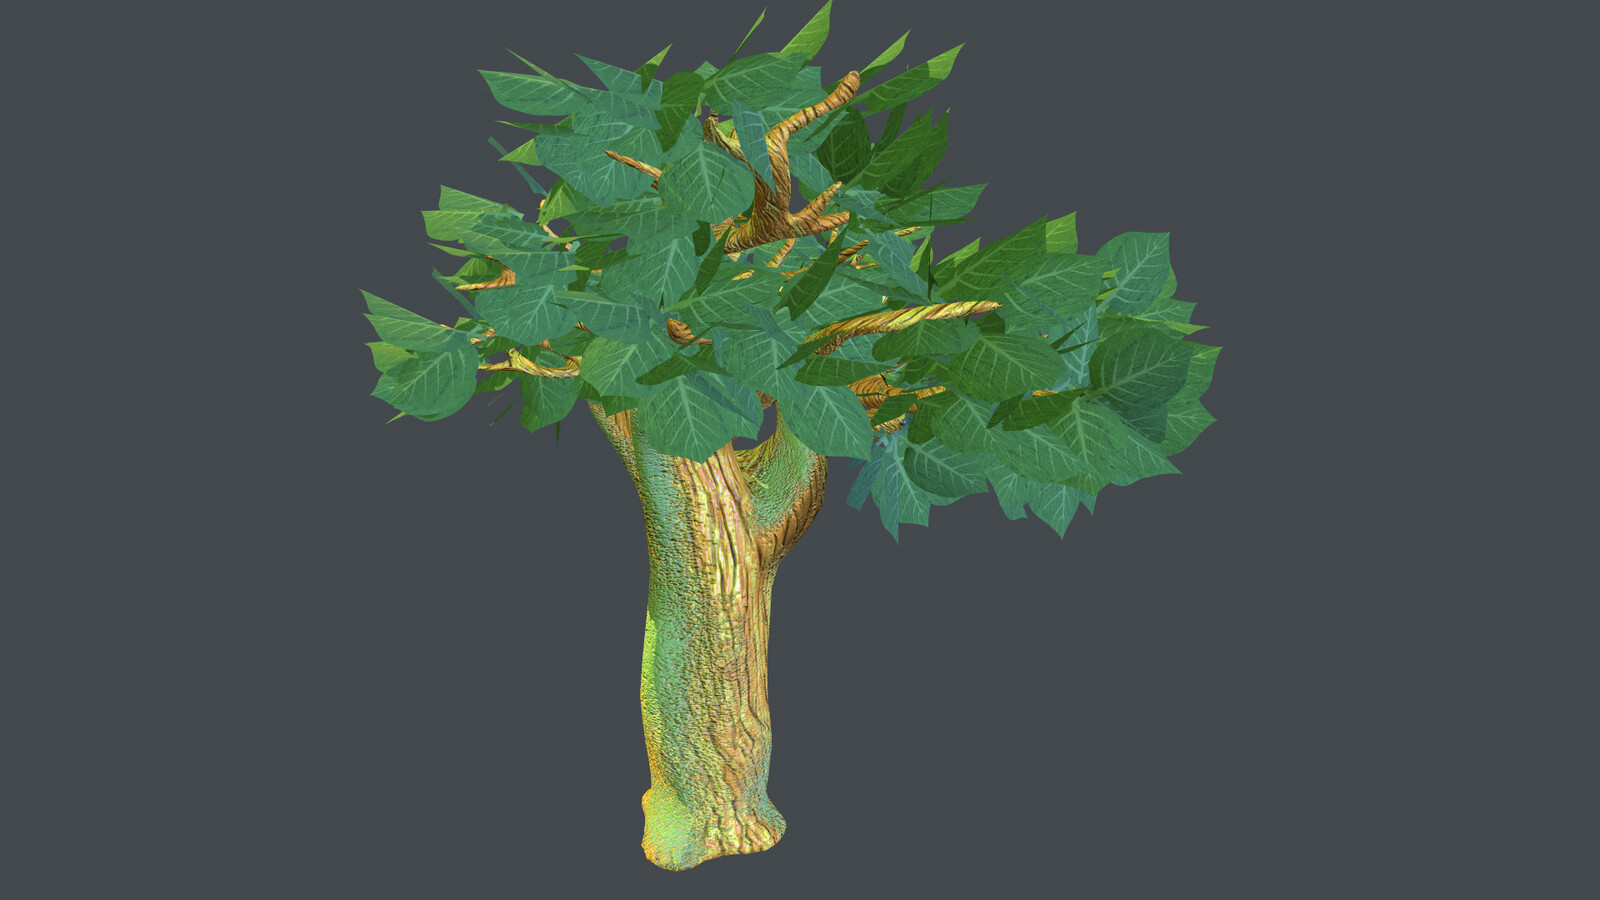 Tree asset I worked on, I also worked on rainbow tree but don't have access to the file anymore